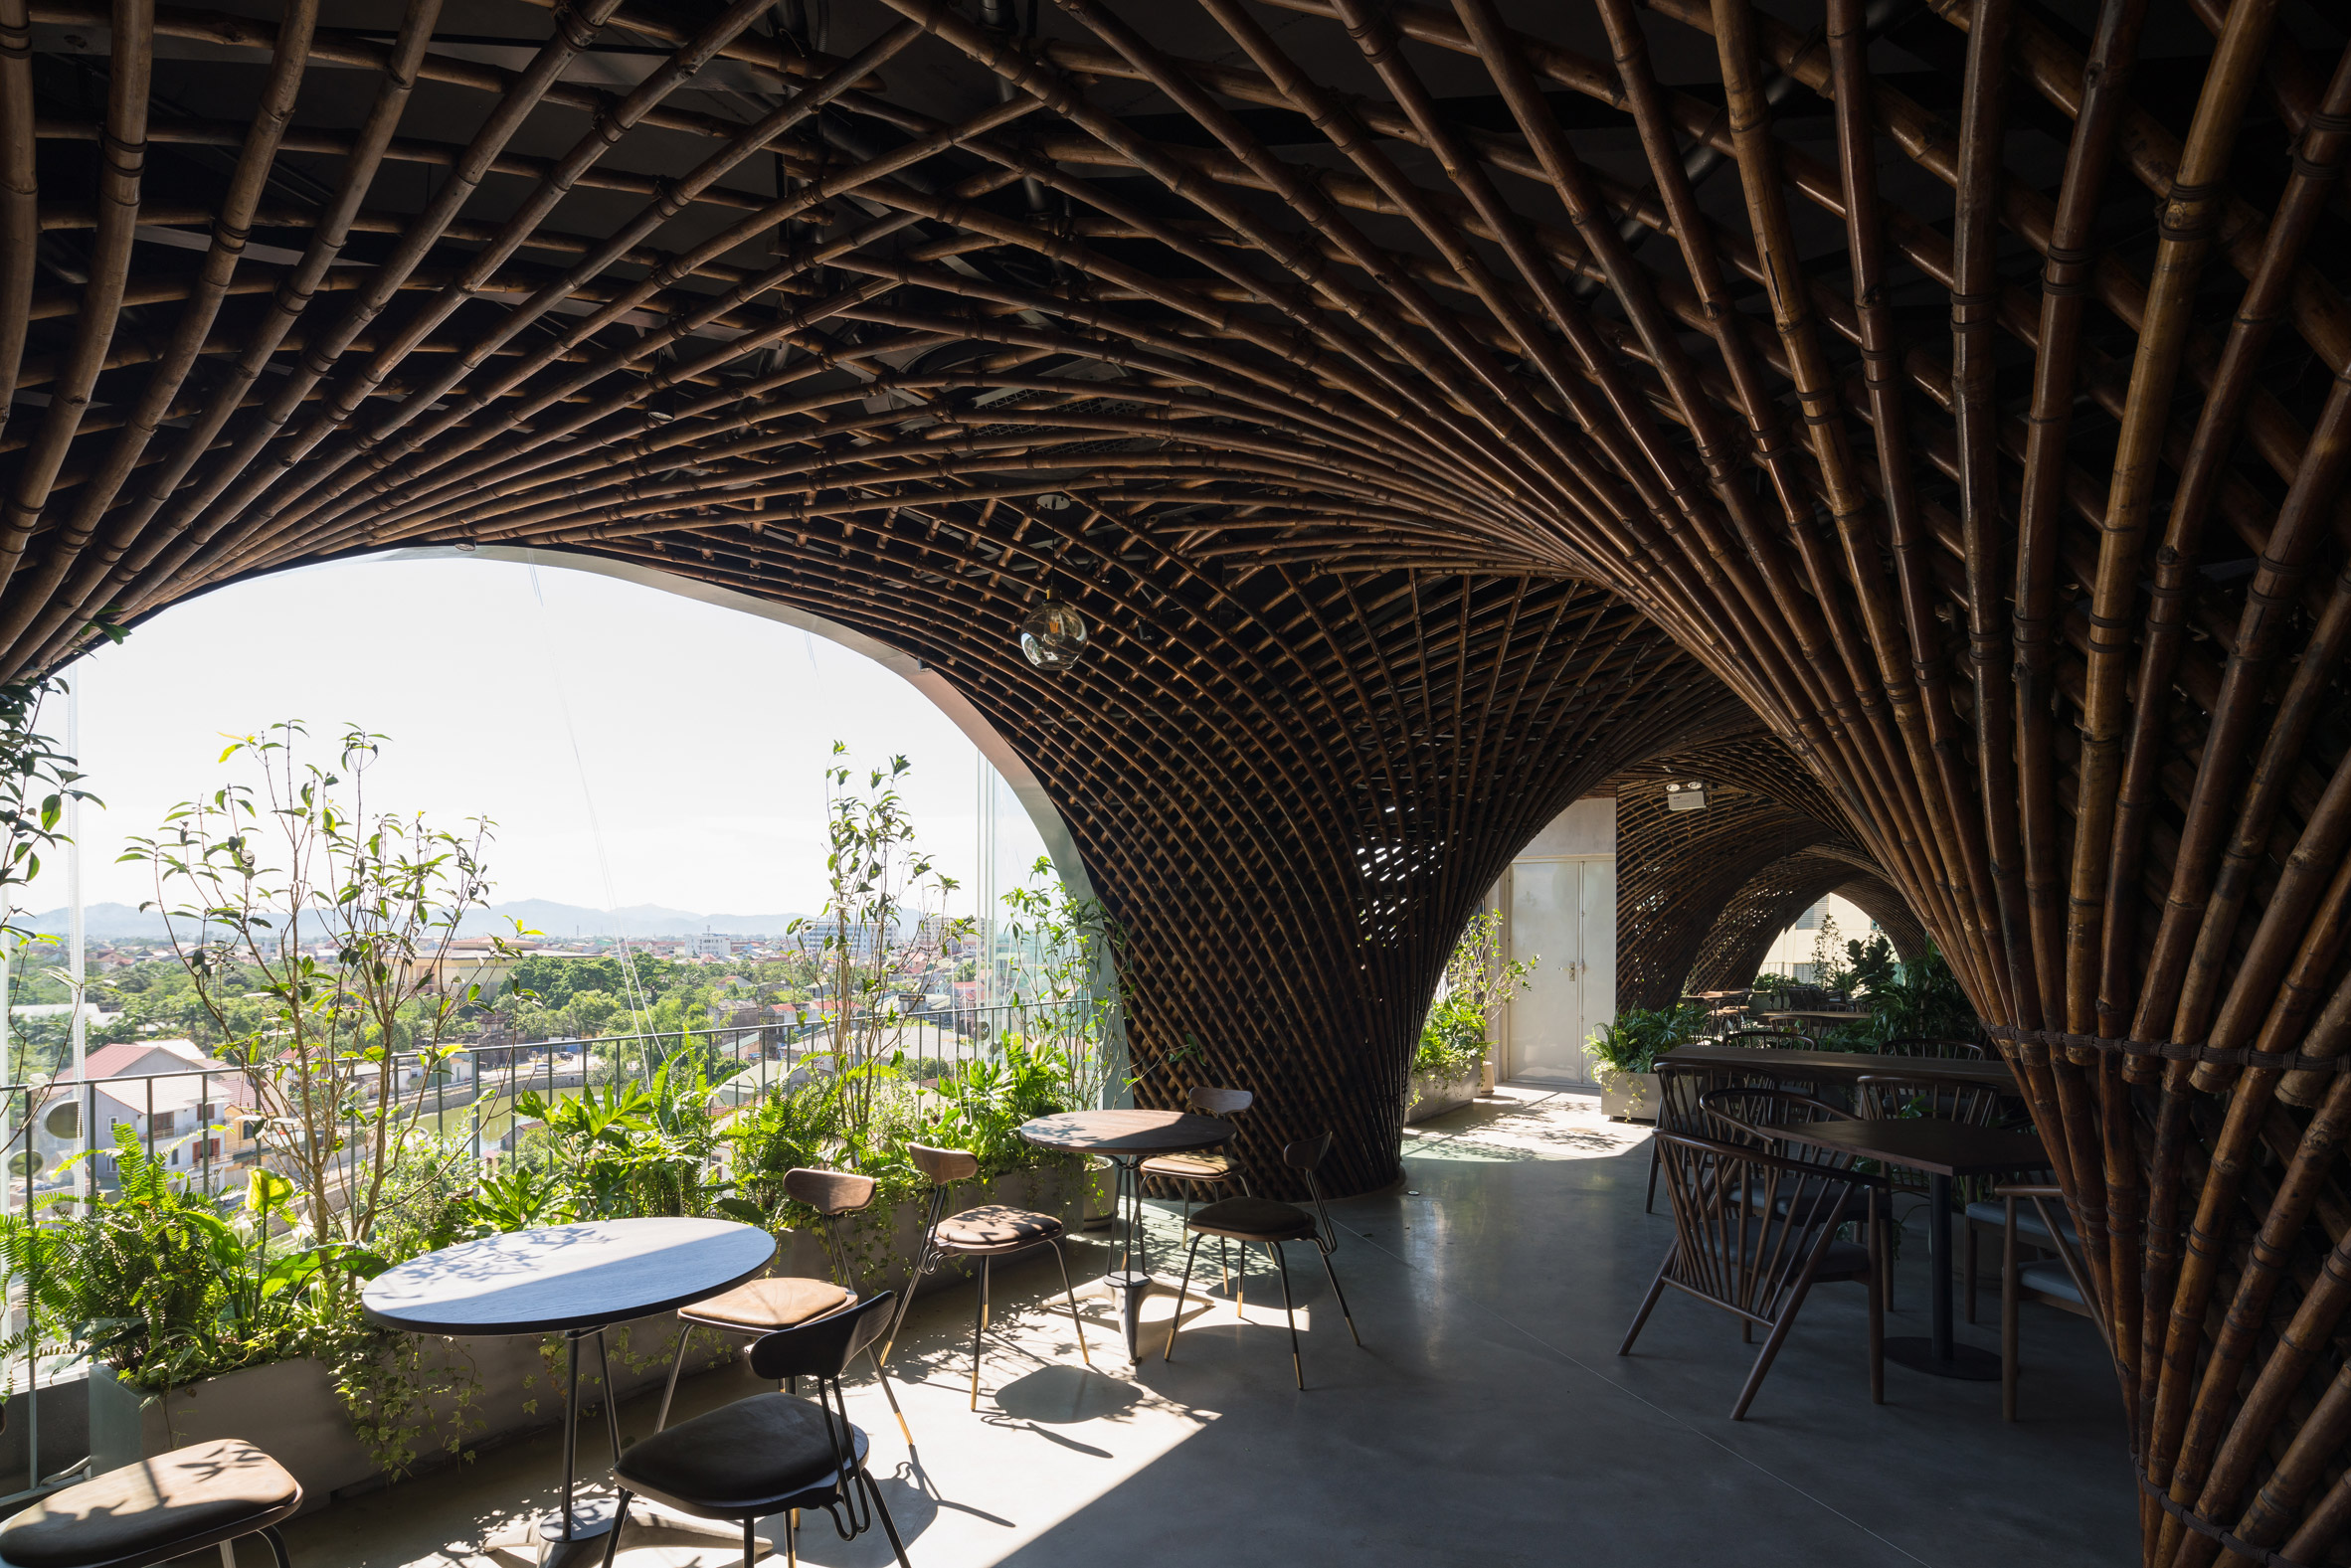 Vo Trong Nghia Architects creates "cave-like" Nocenco cafe with swirling bamboo ceiling